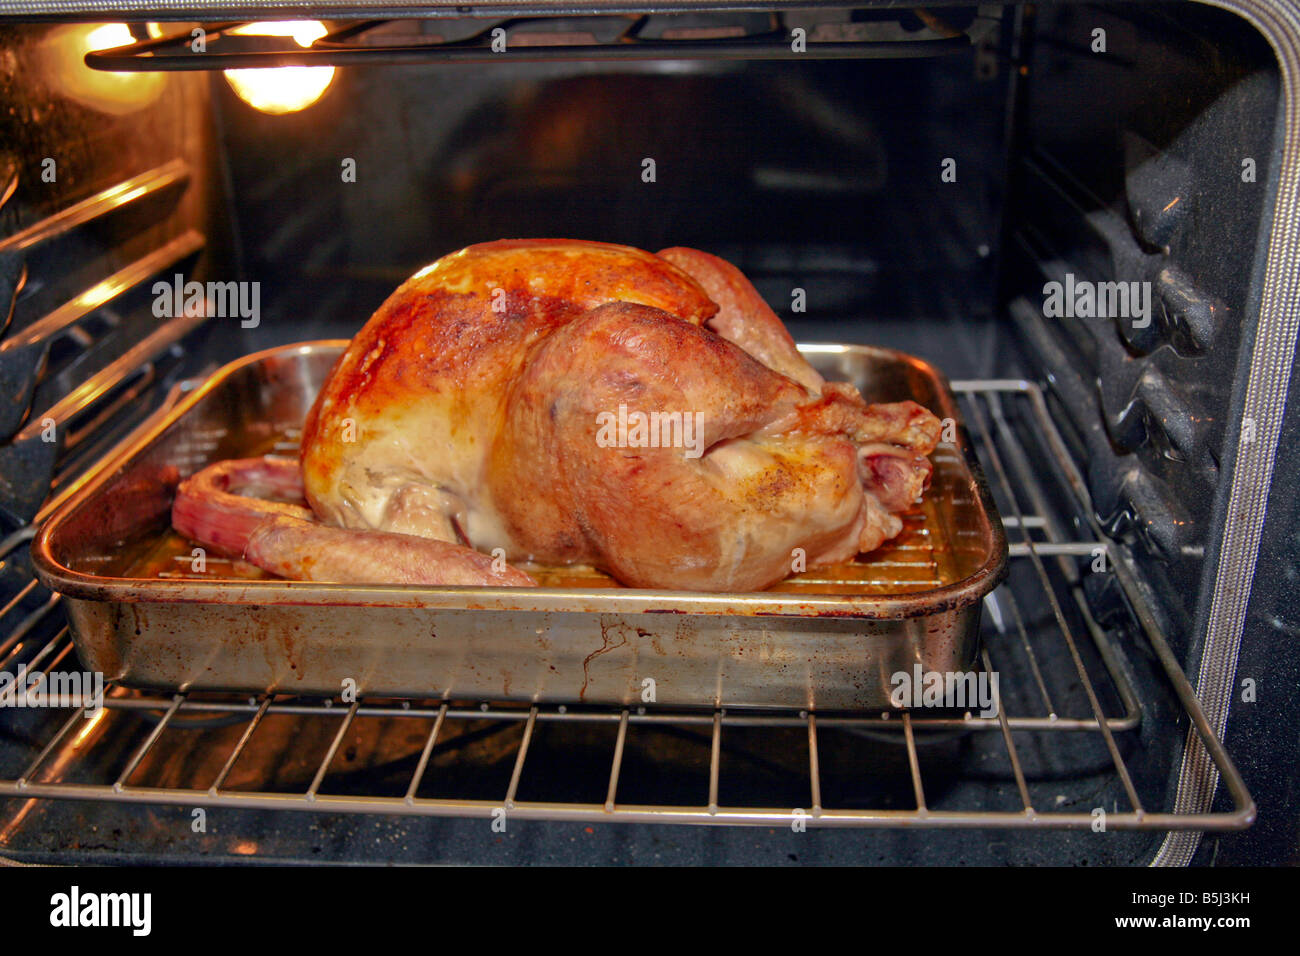 Turkey in Oven Preparing a Thanksgiving or Christmas Turkey Dinner in North America Stock Photo